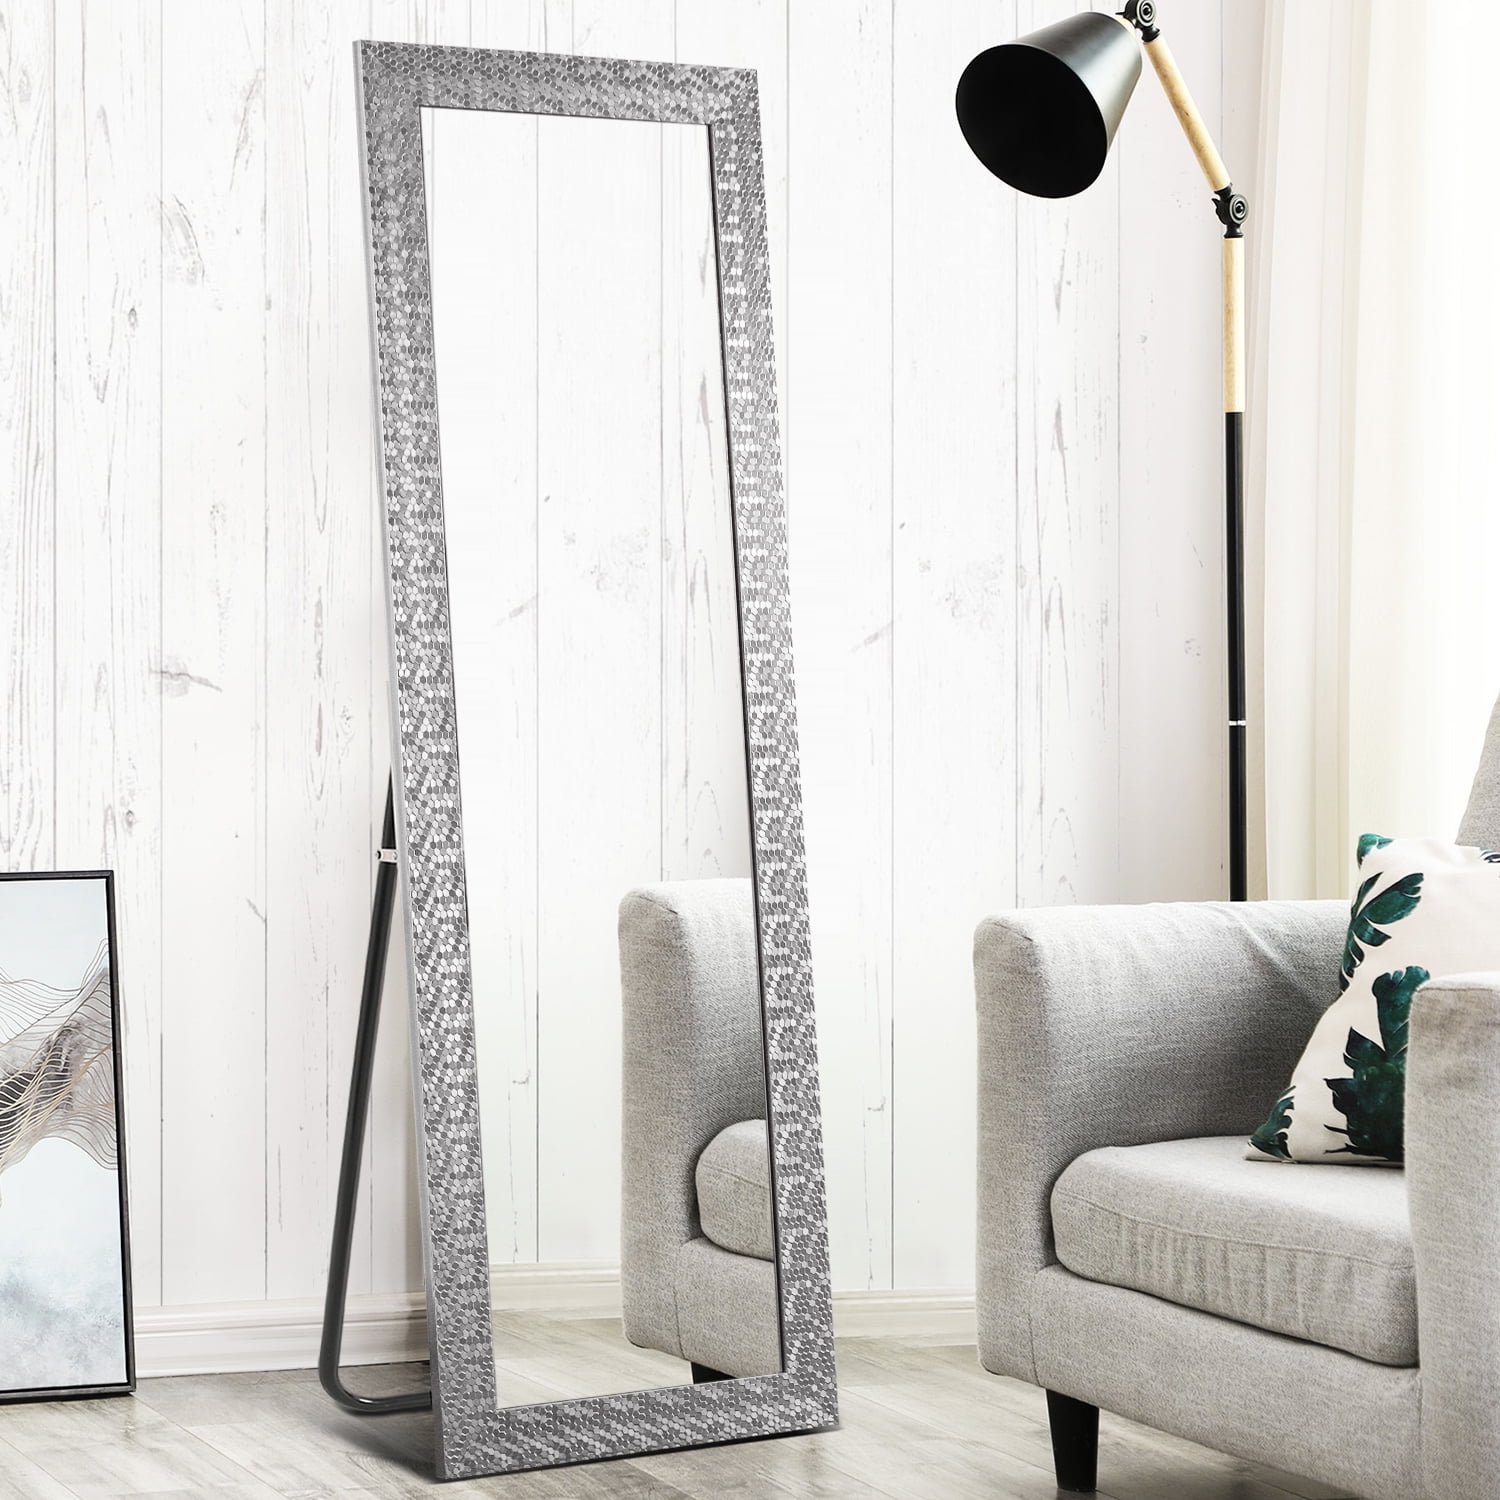 NeuType Mosaic Floor Mirror with Stand Full Length Mirror Wide Frame